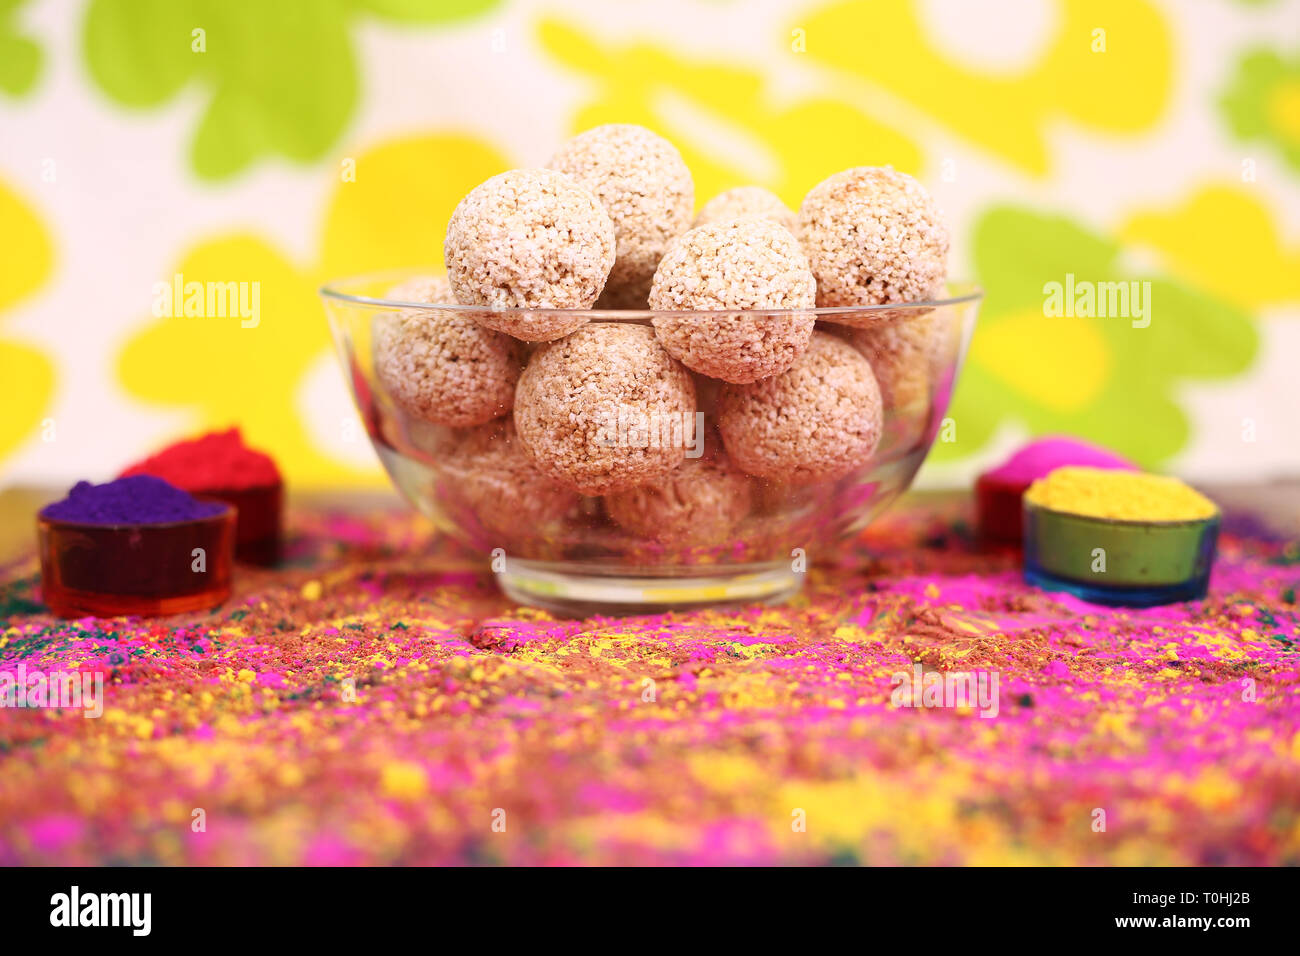 Portrait of organic holi color with cholai ke ladoo in the bowl. Isolated on the colorful background. Stock Photo